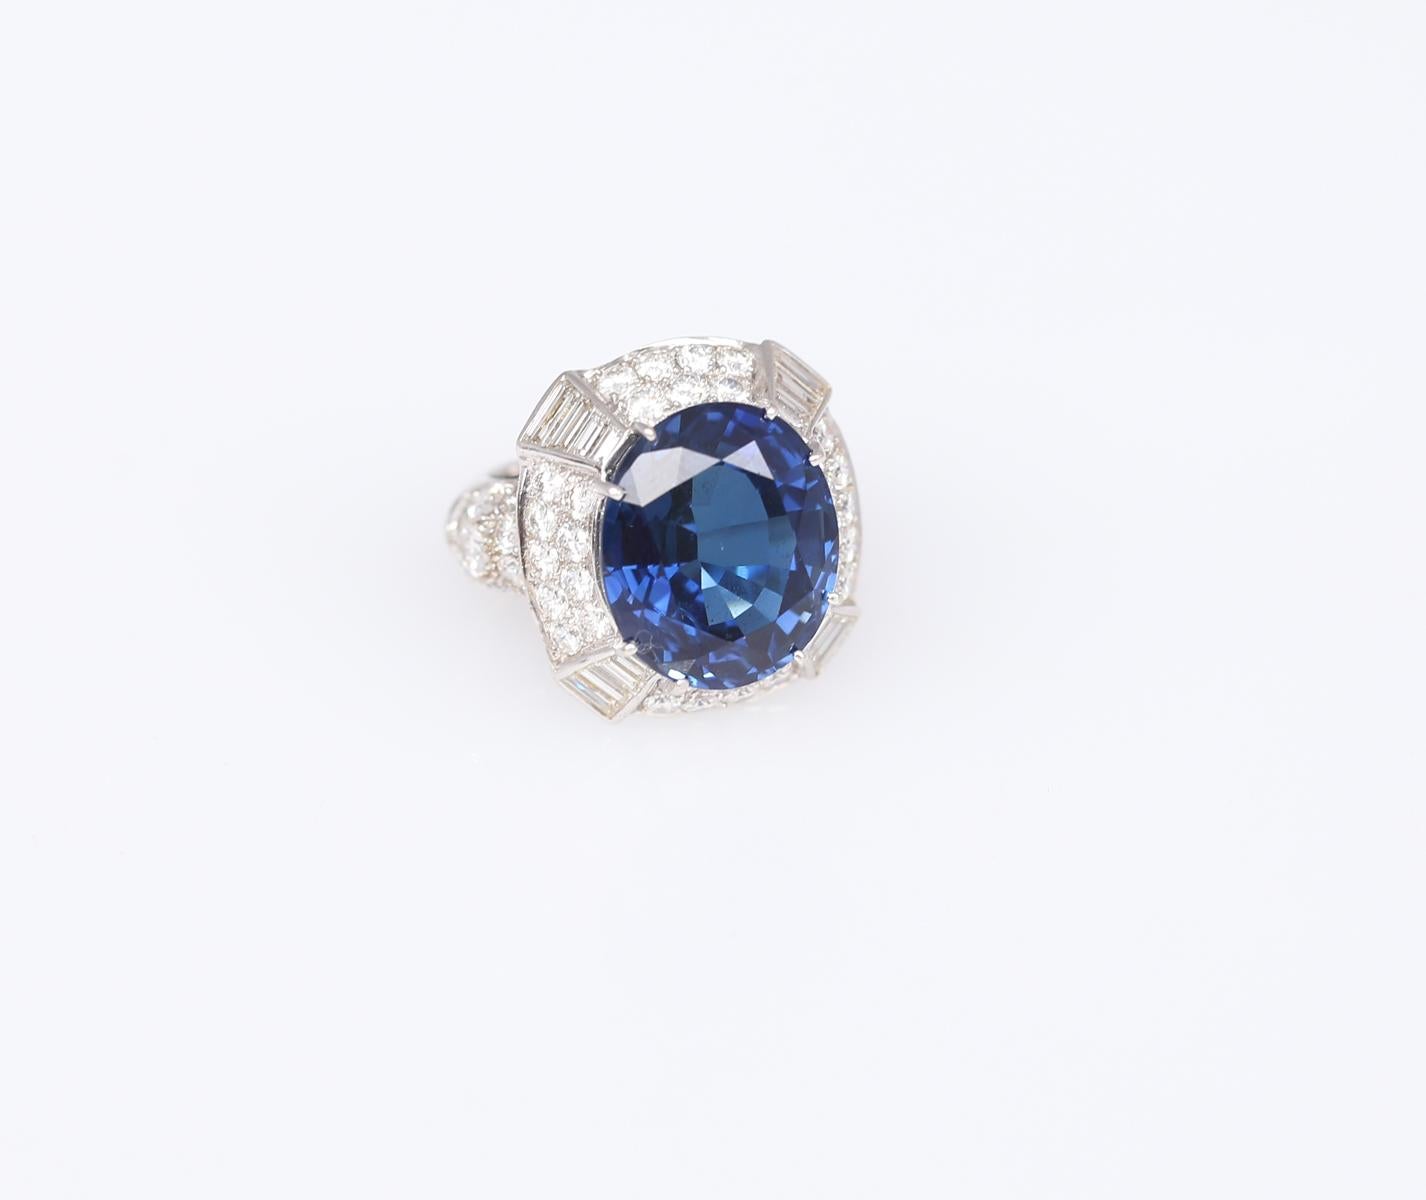 14.6 Ct Natural Sapphire Certified Diamond Ring 18K Gold, 1998 In Good Condition For Sale In Herzelia, Tel Aviv